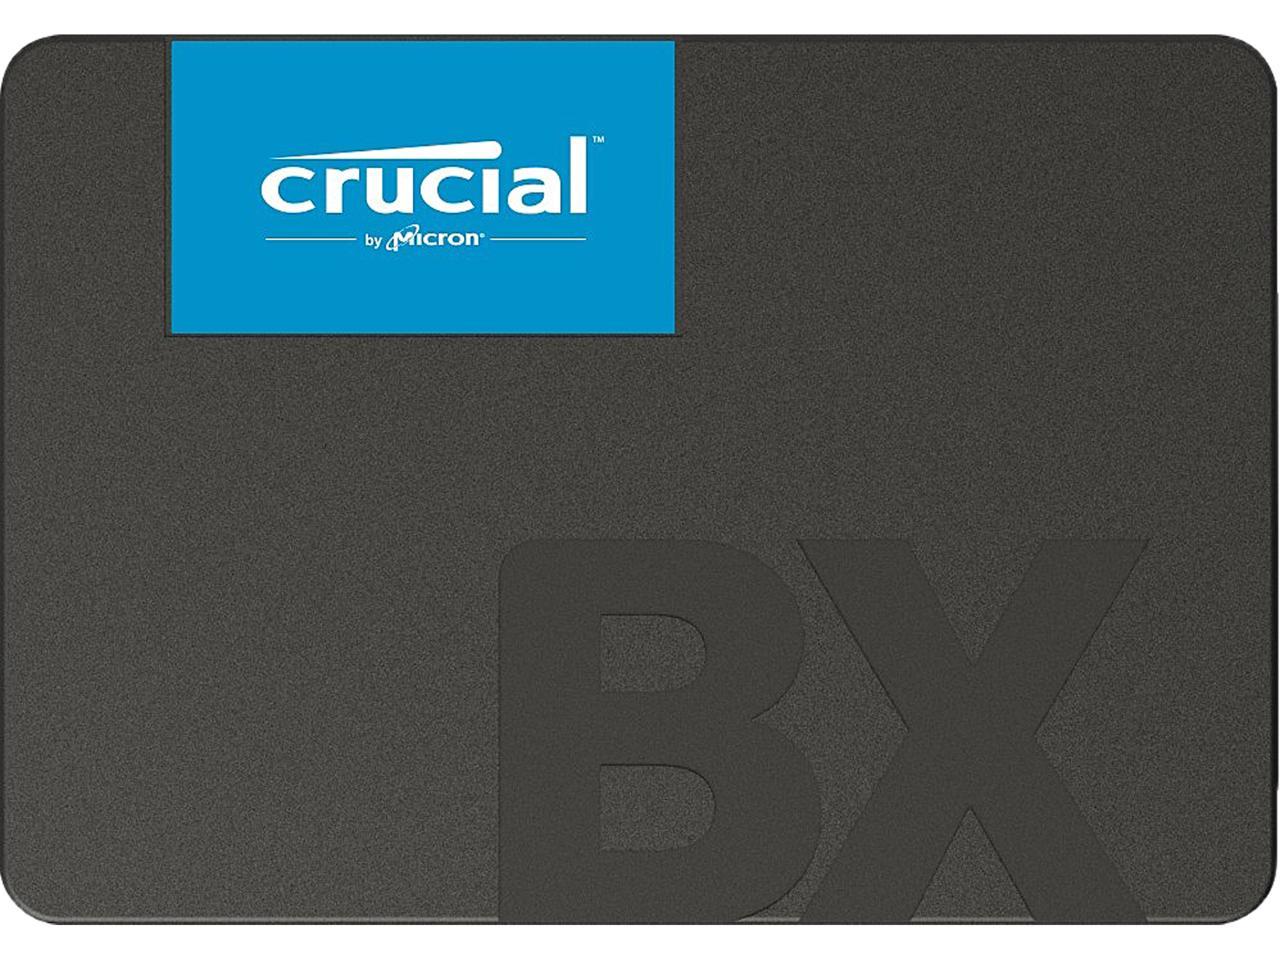 1TB Crucial BX500 3D NAND 2.5" SATA Internal Solid State Drive $49 + Free Shipping